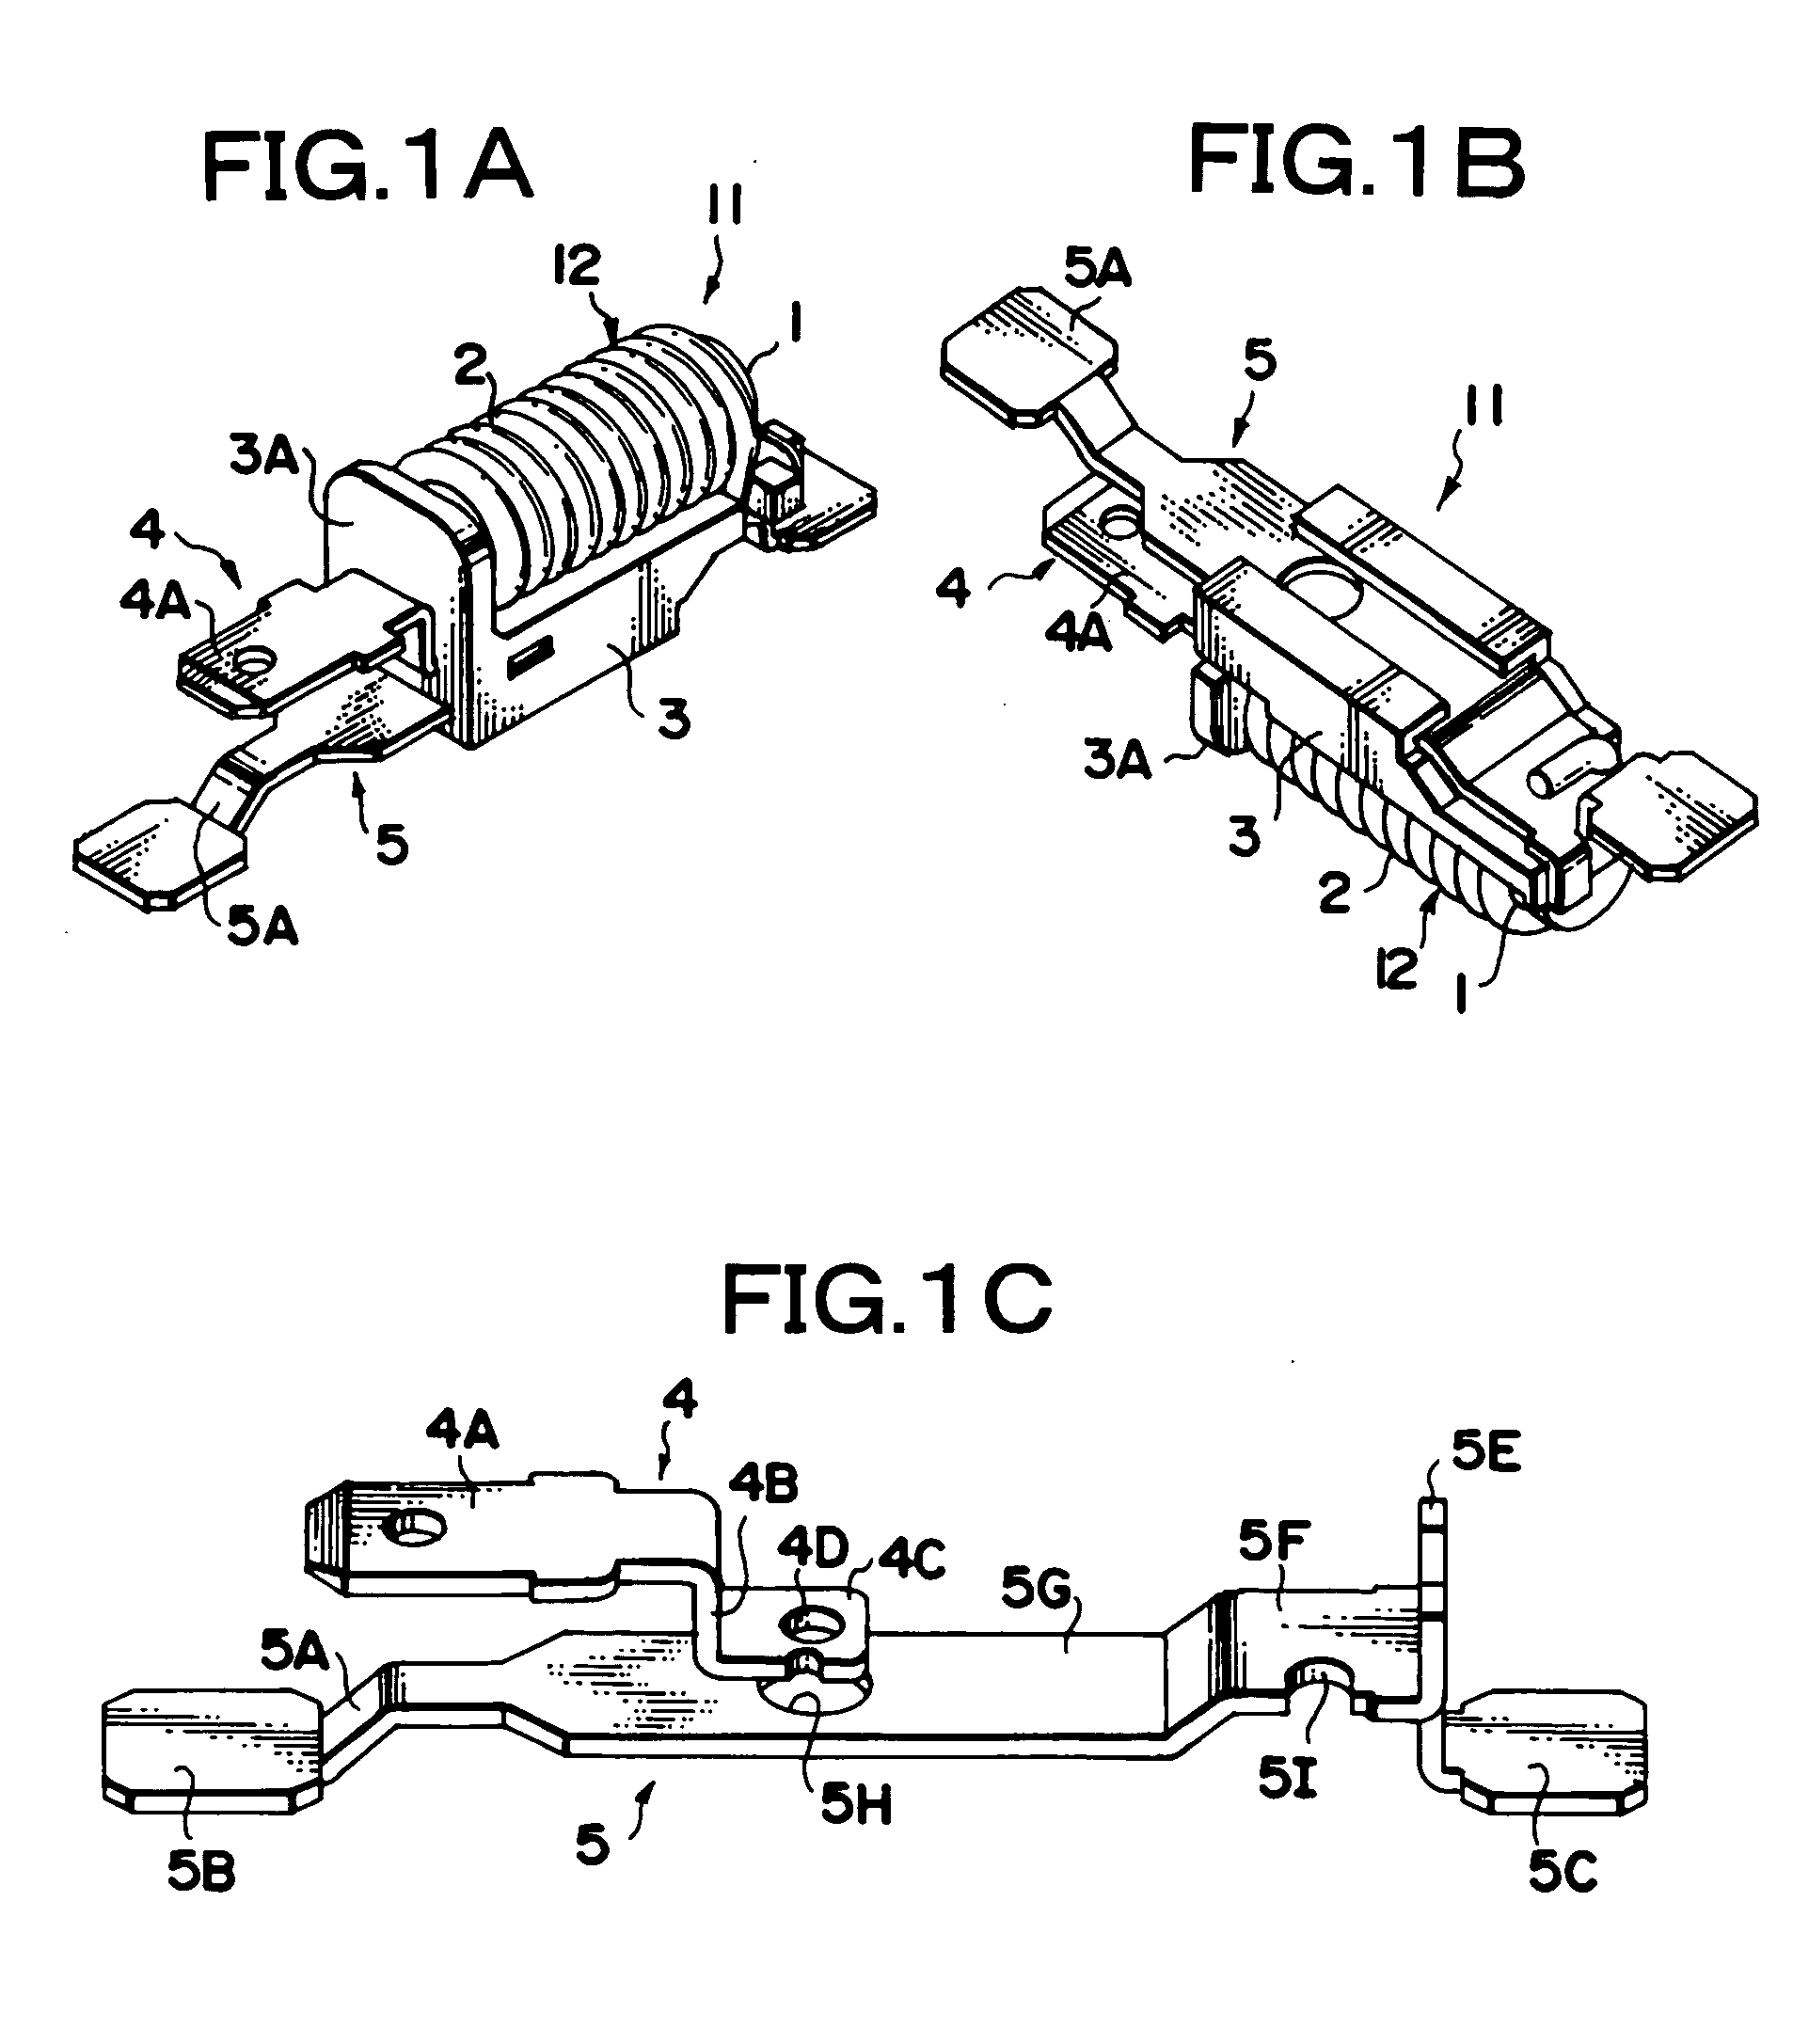 Antenna coil device